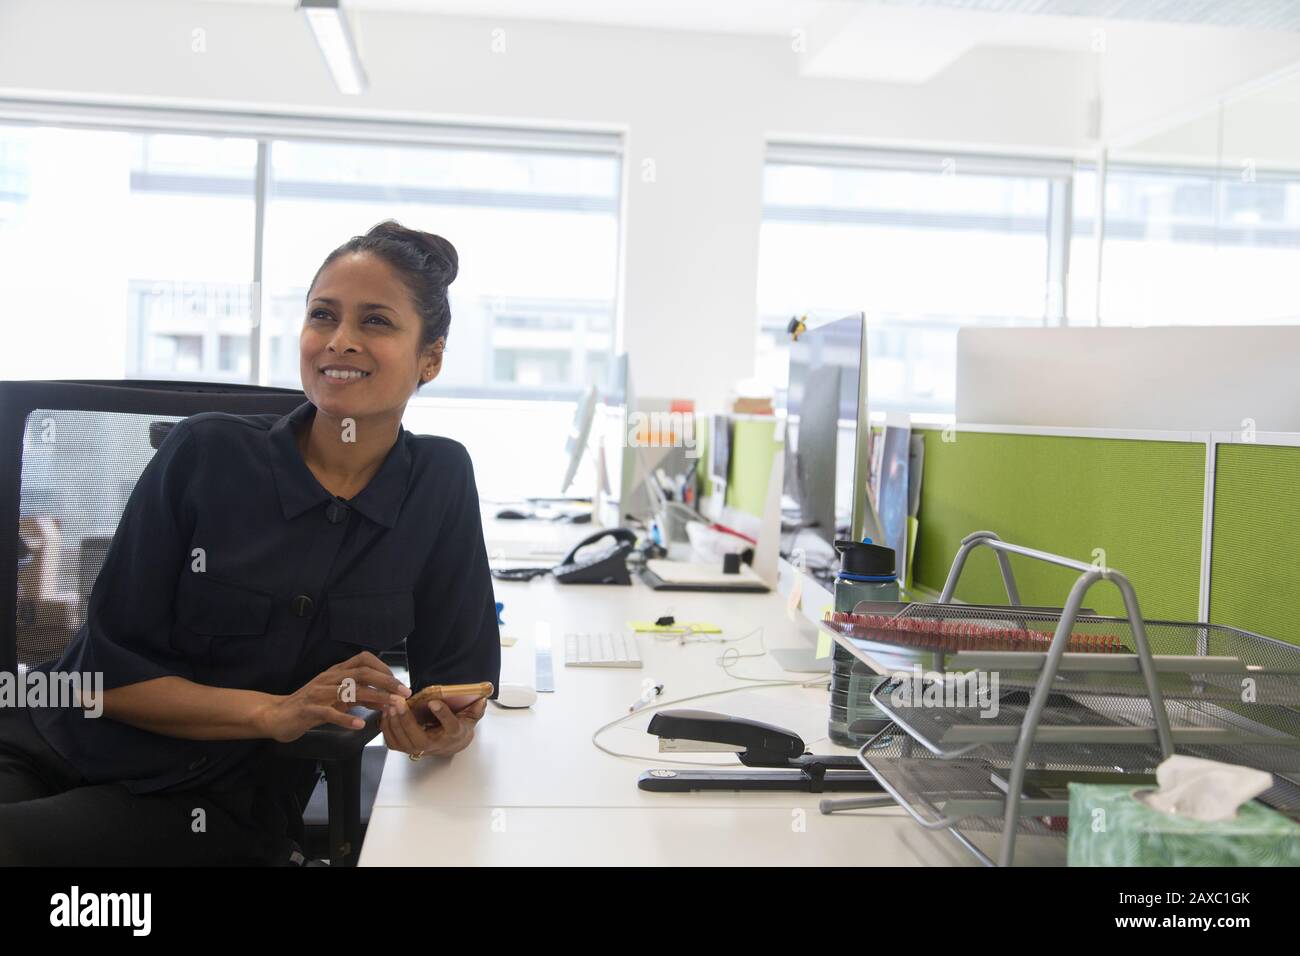 Smiling businesswoman using smart phone in open plan office Stock Photo